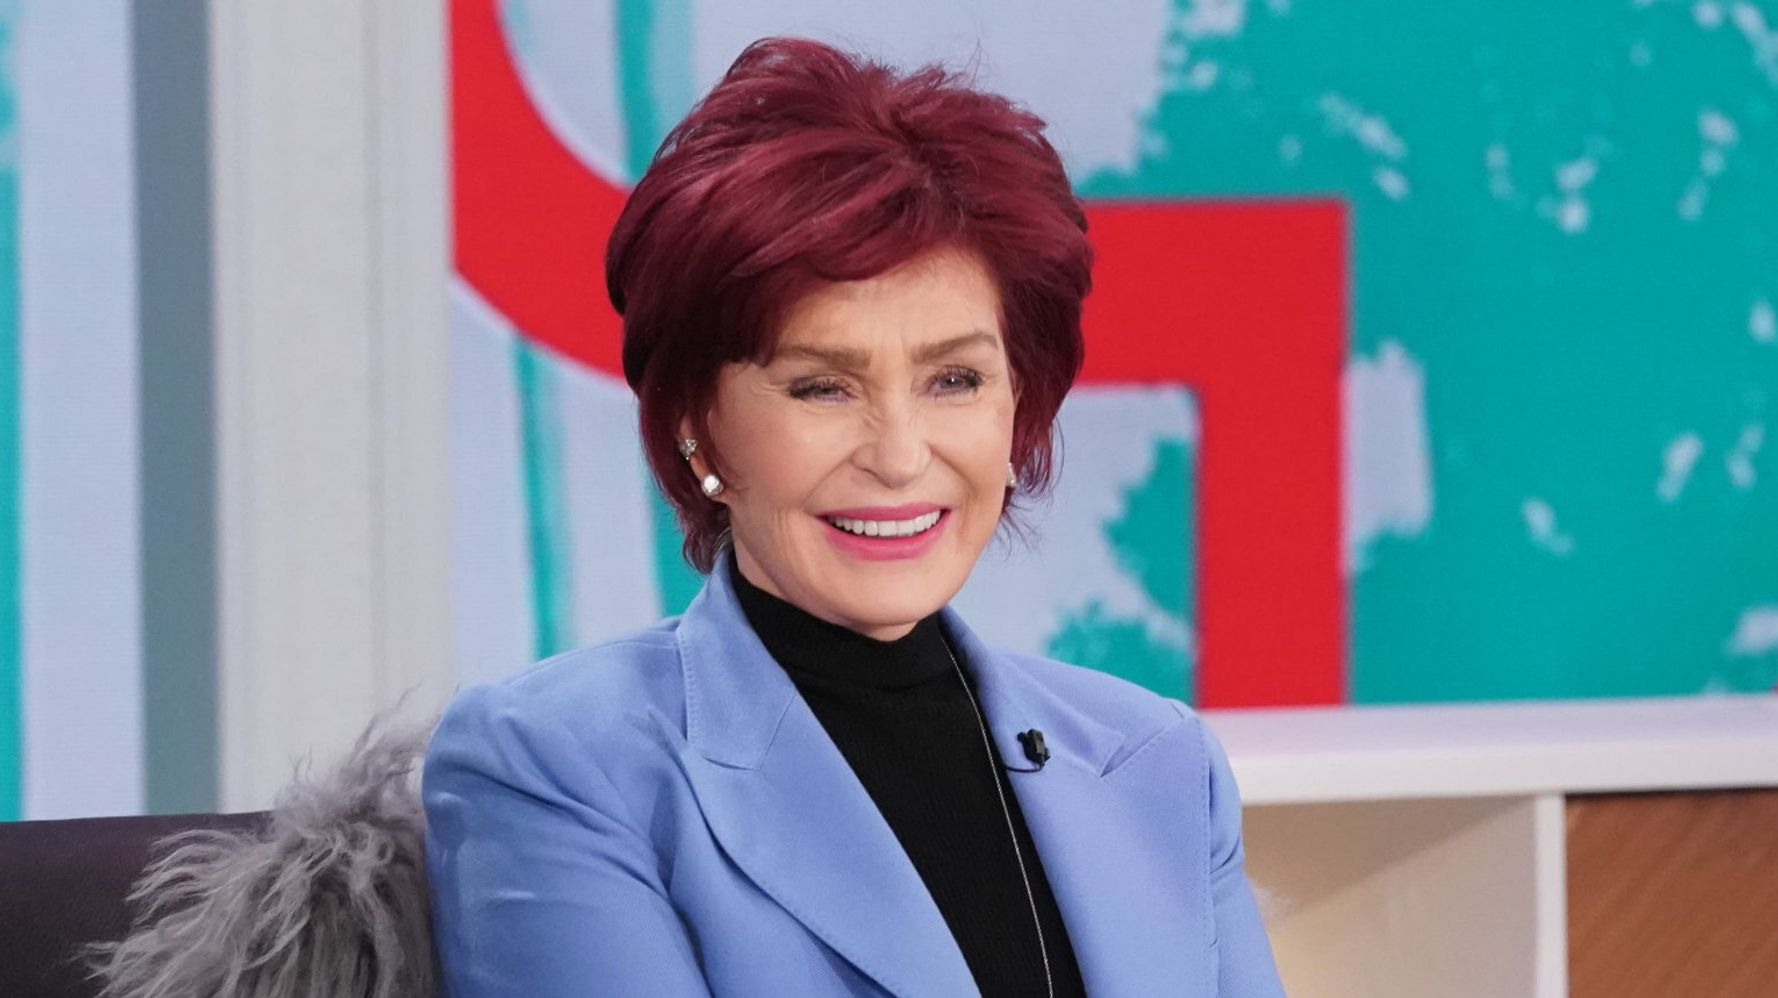 Leah Remini: Sharon Osbourne called her ‘Talk’ co-host offensive insults